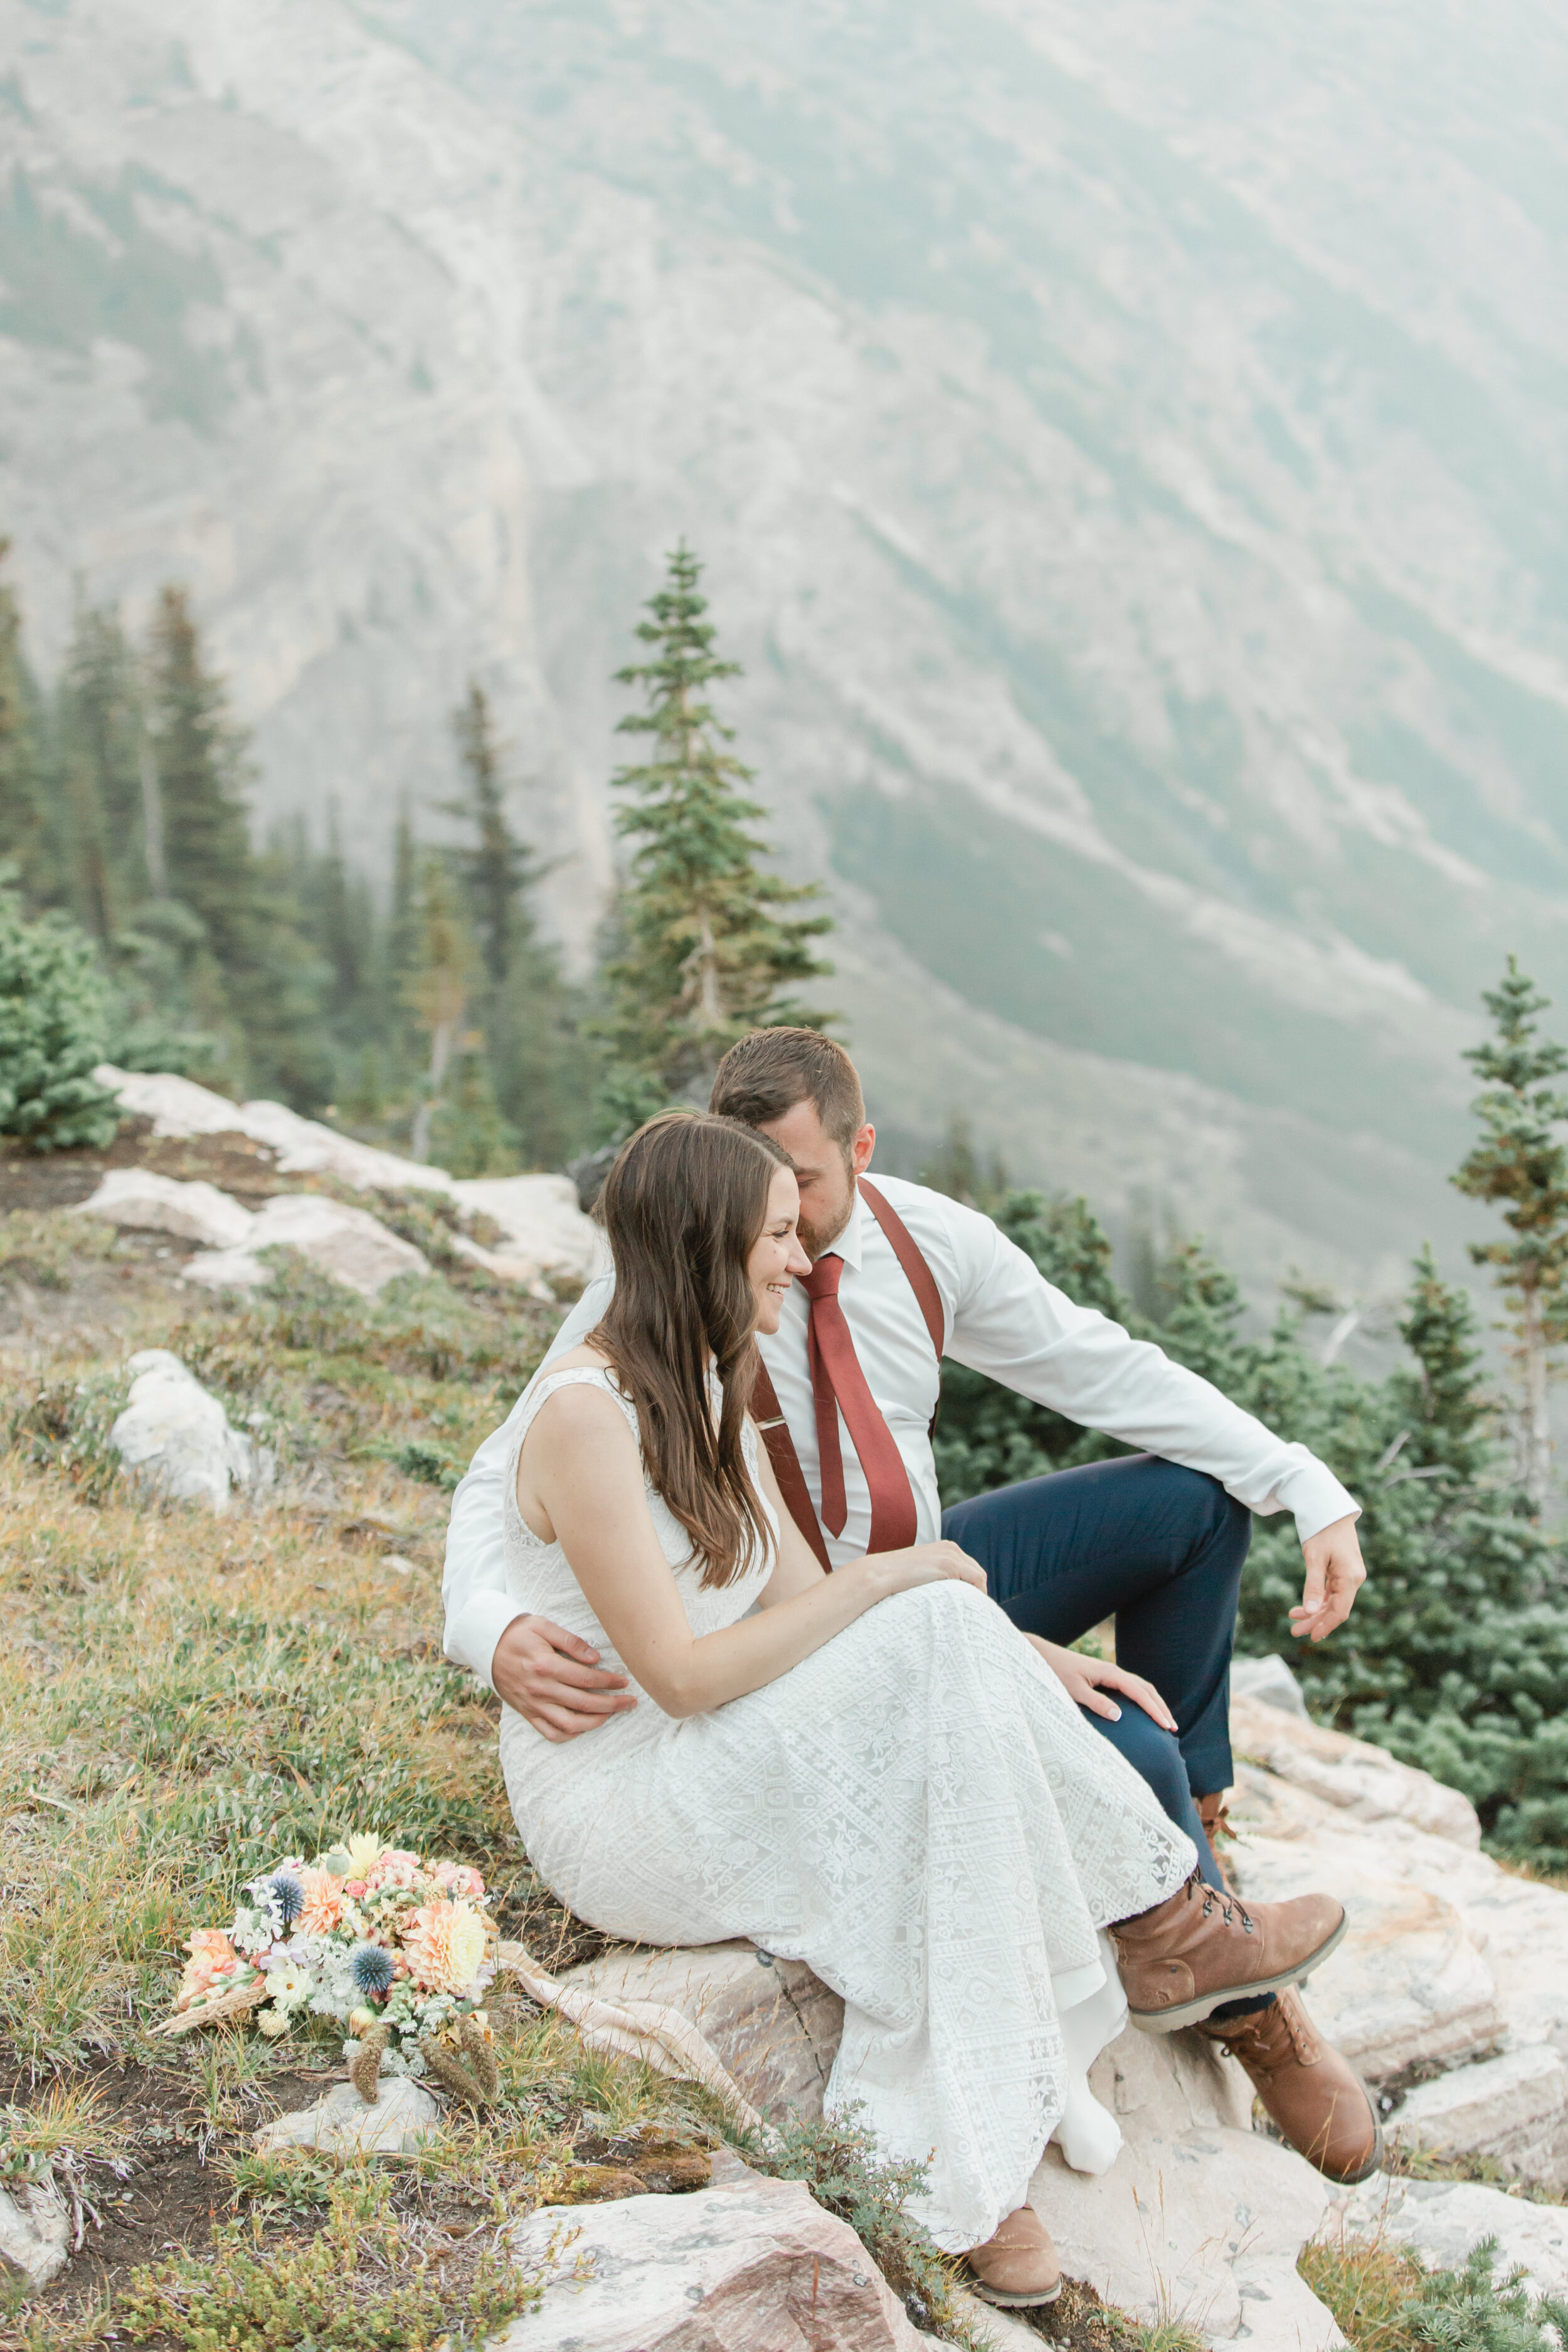 A newly married couple embraces while sitting on a mountainside in Banff.